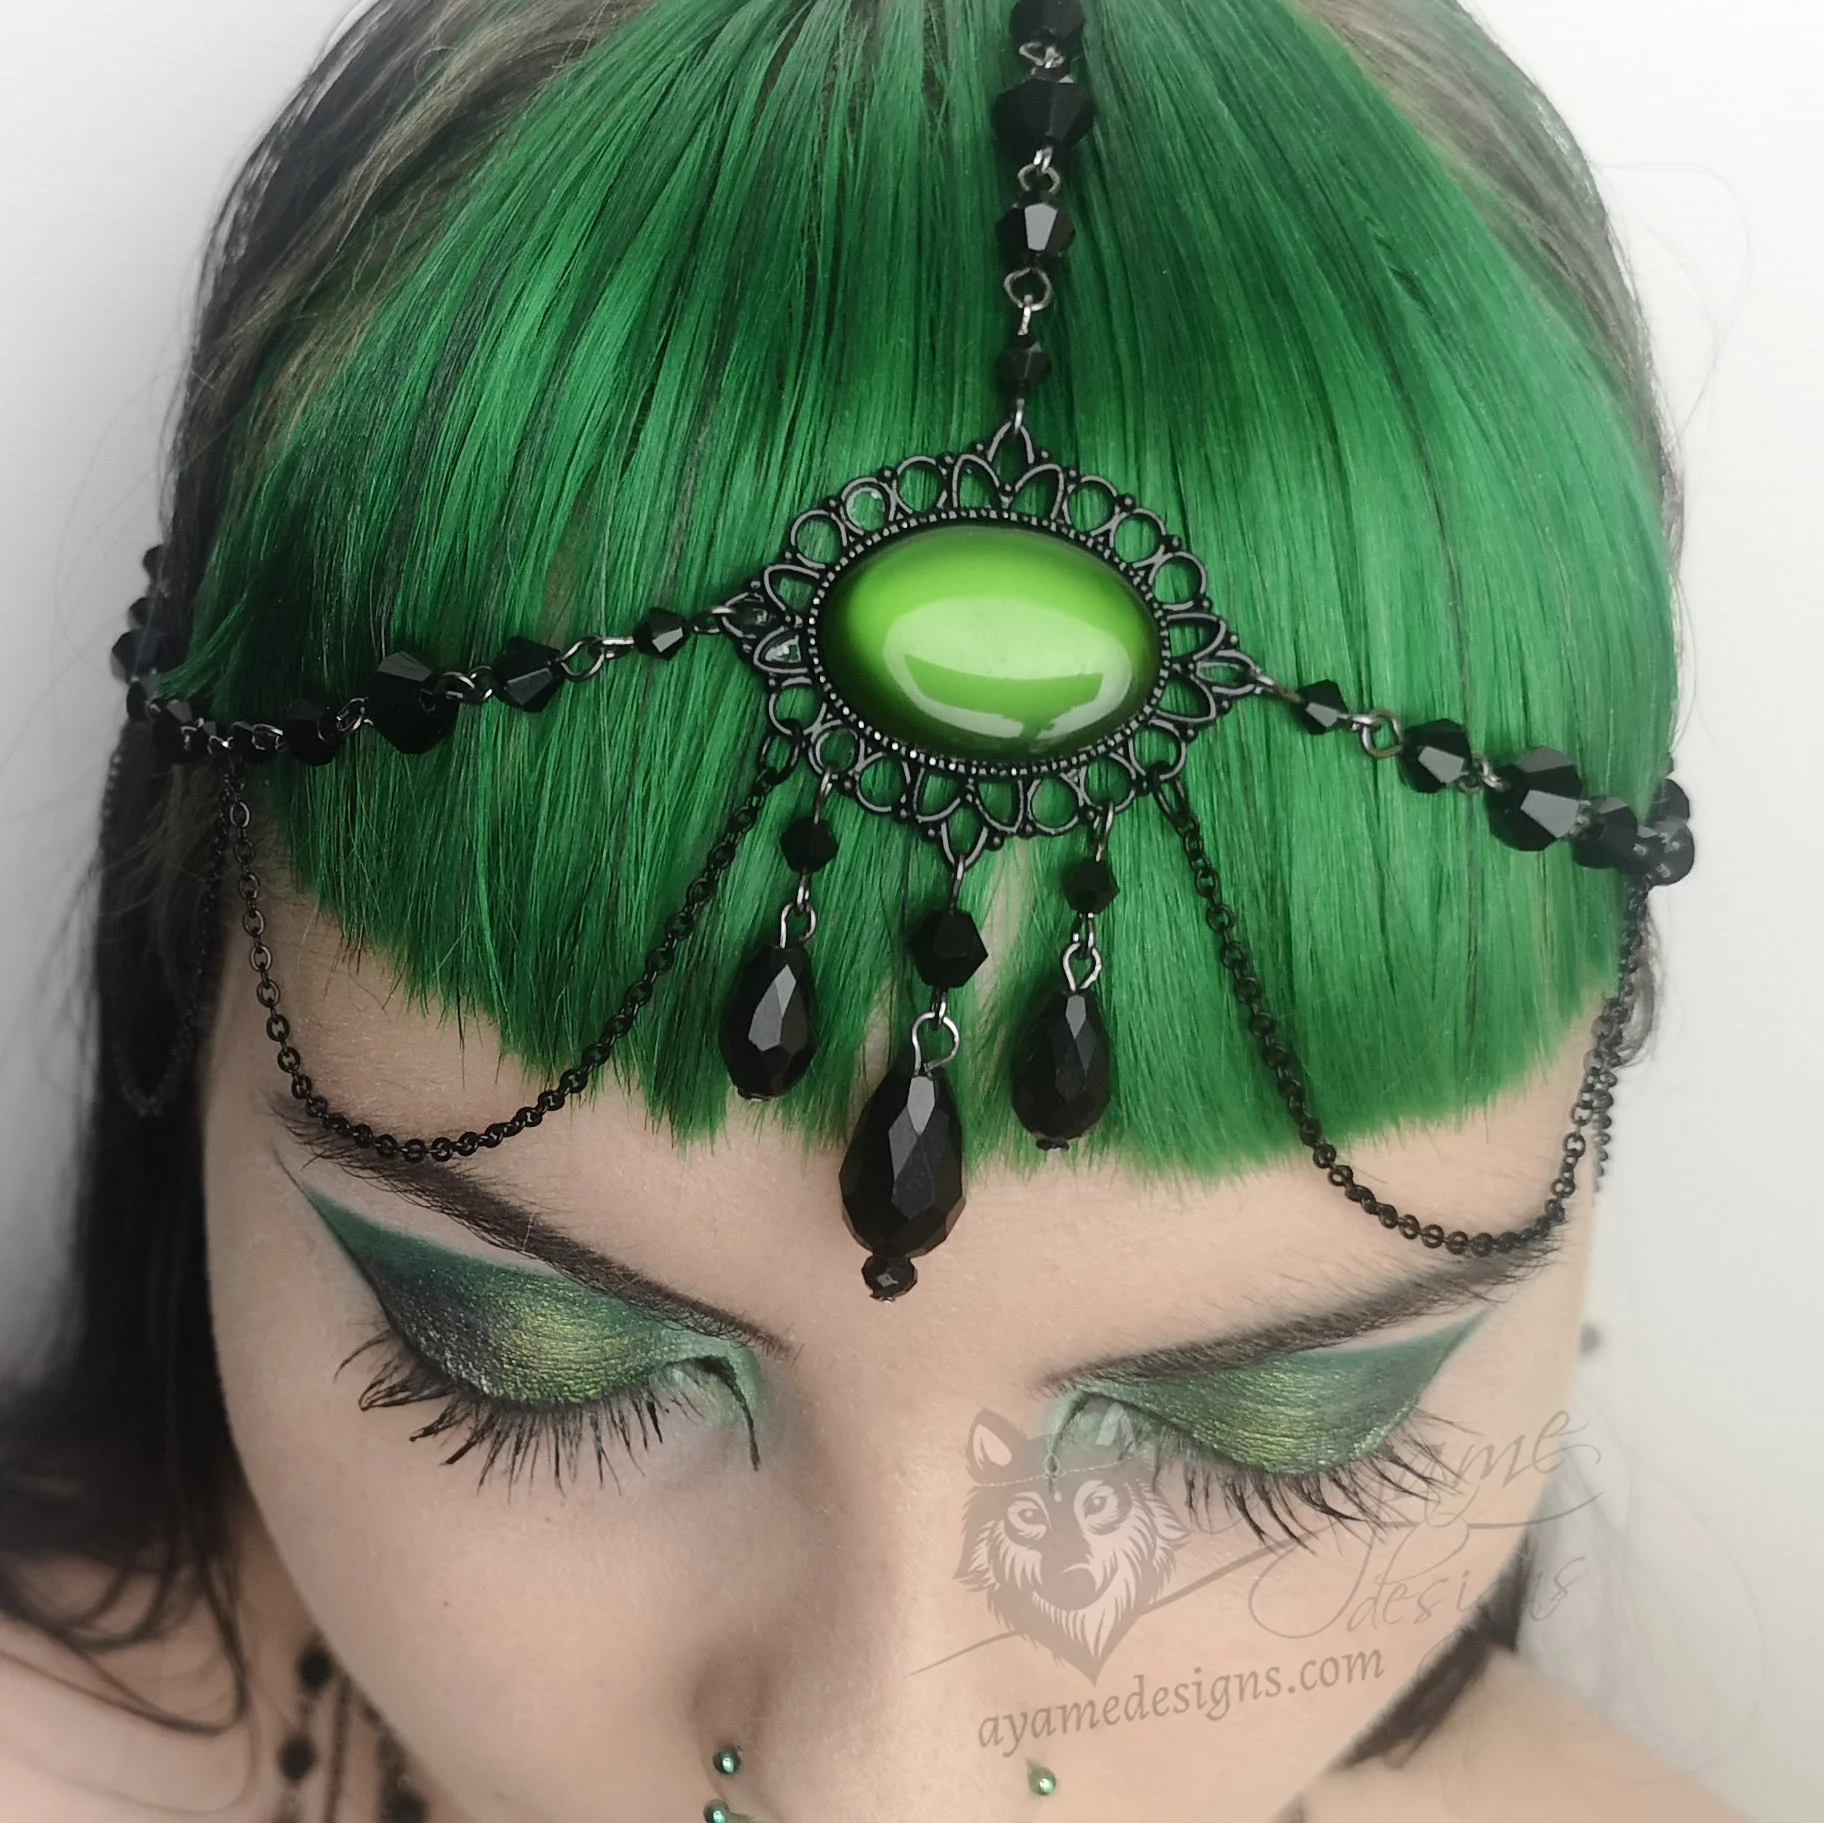 Handmade gothic head chain with a green resin cabochon in a black filigree frame, black Austrian crystal beads and black stainless steel chain